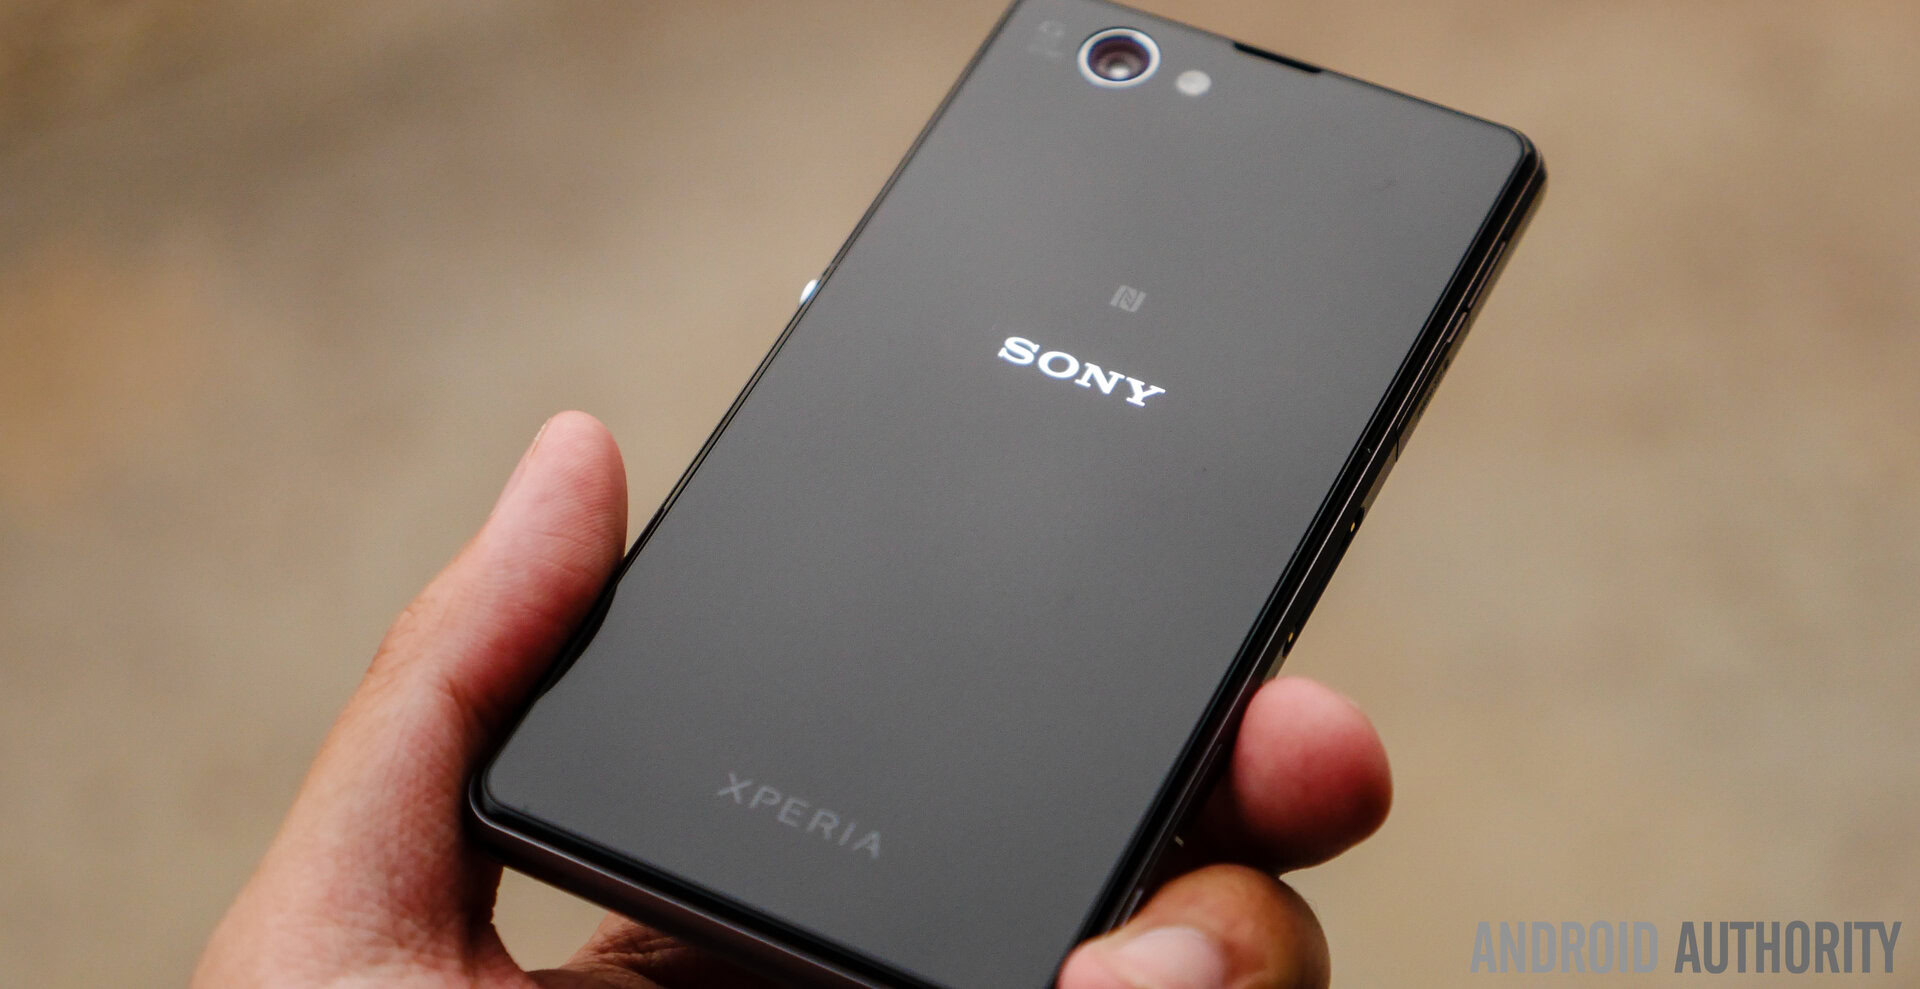 Xperia Compact specs and image leaked